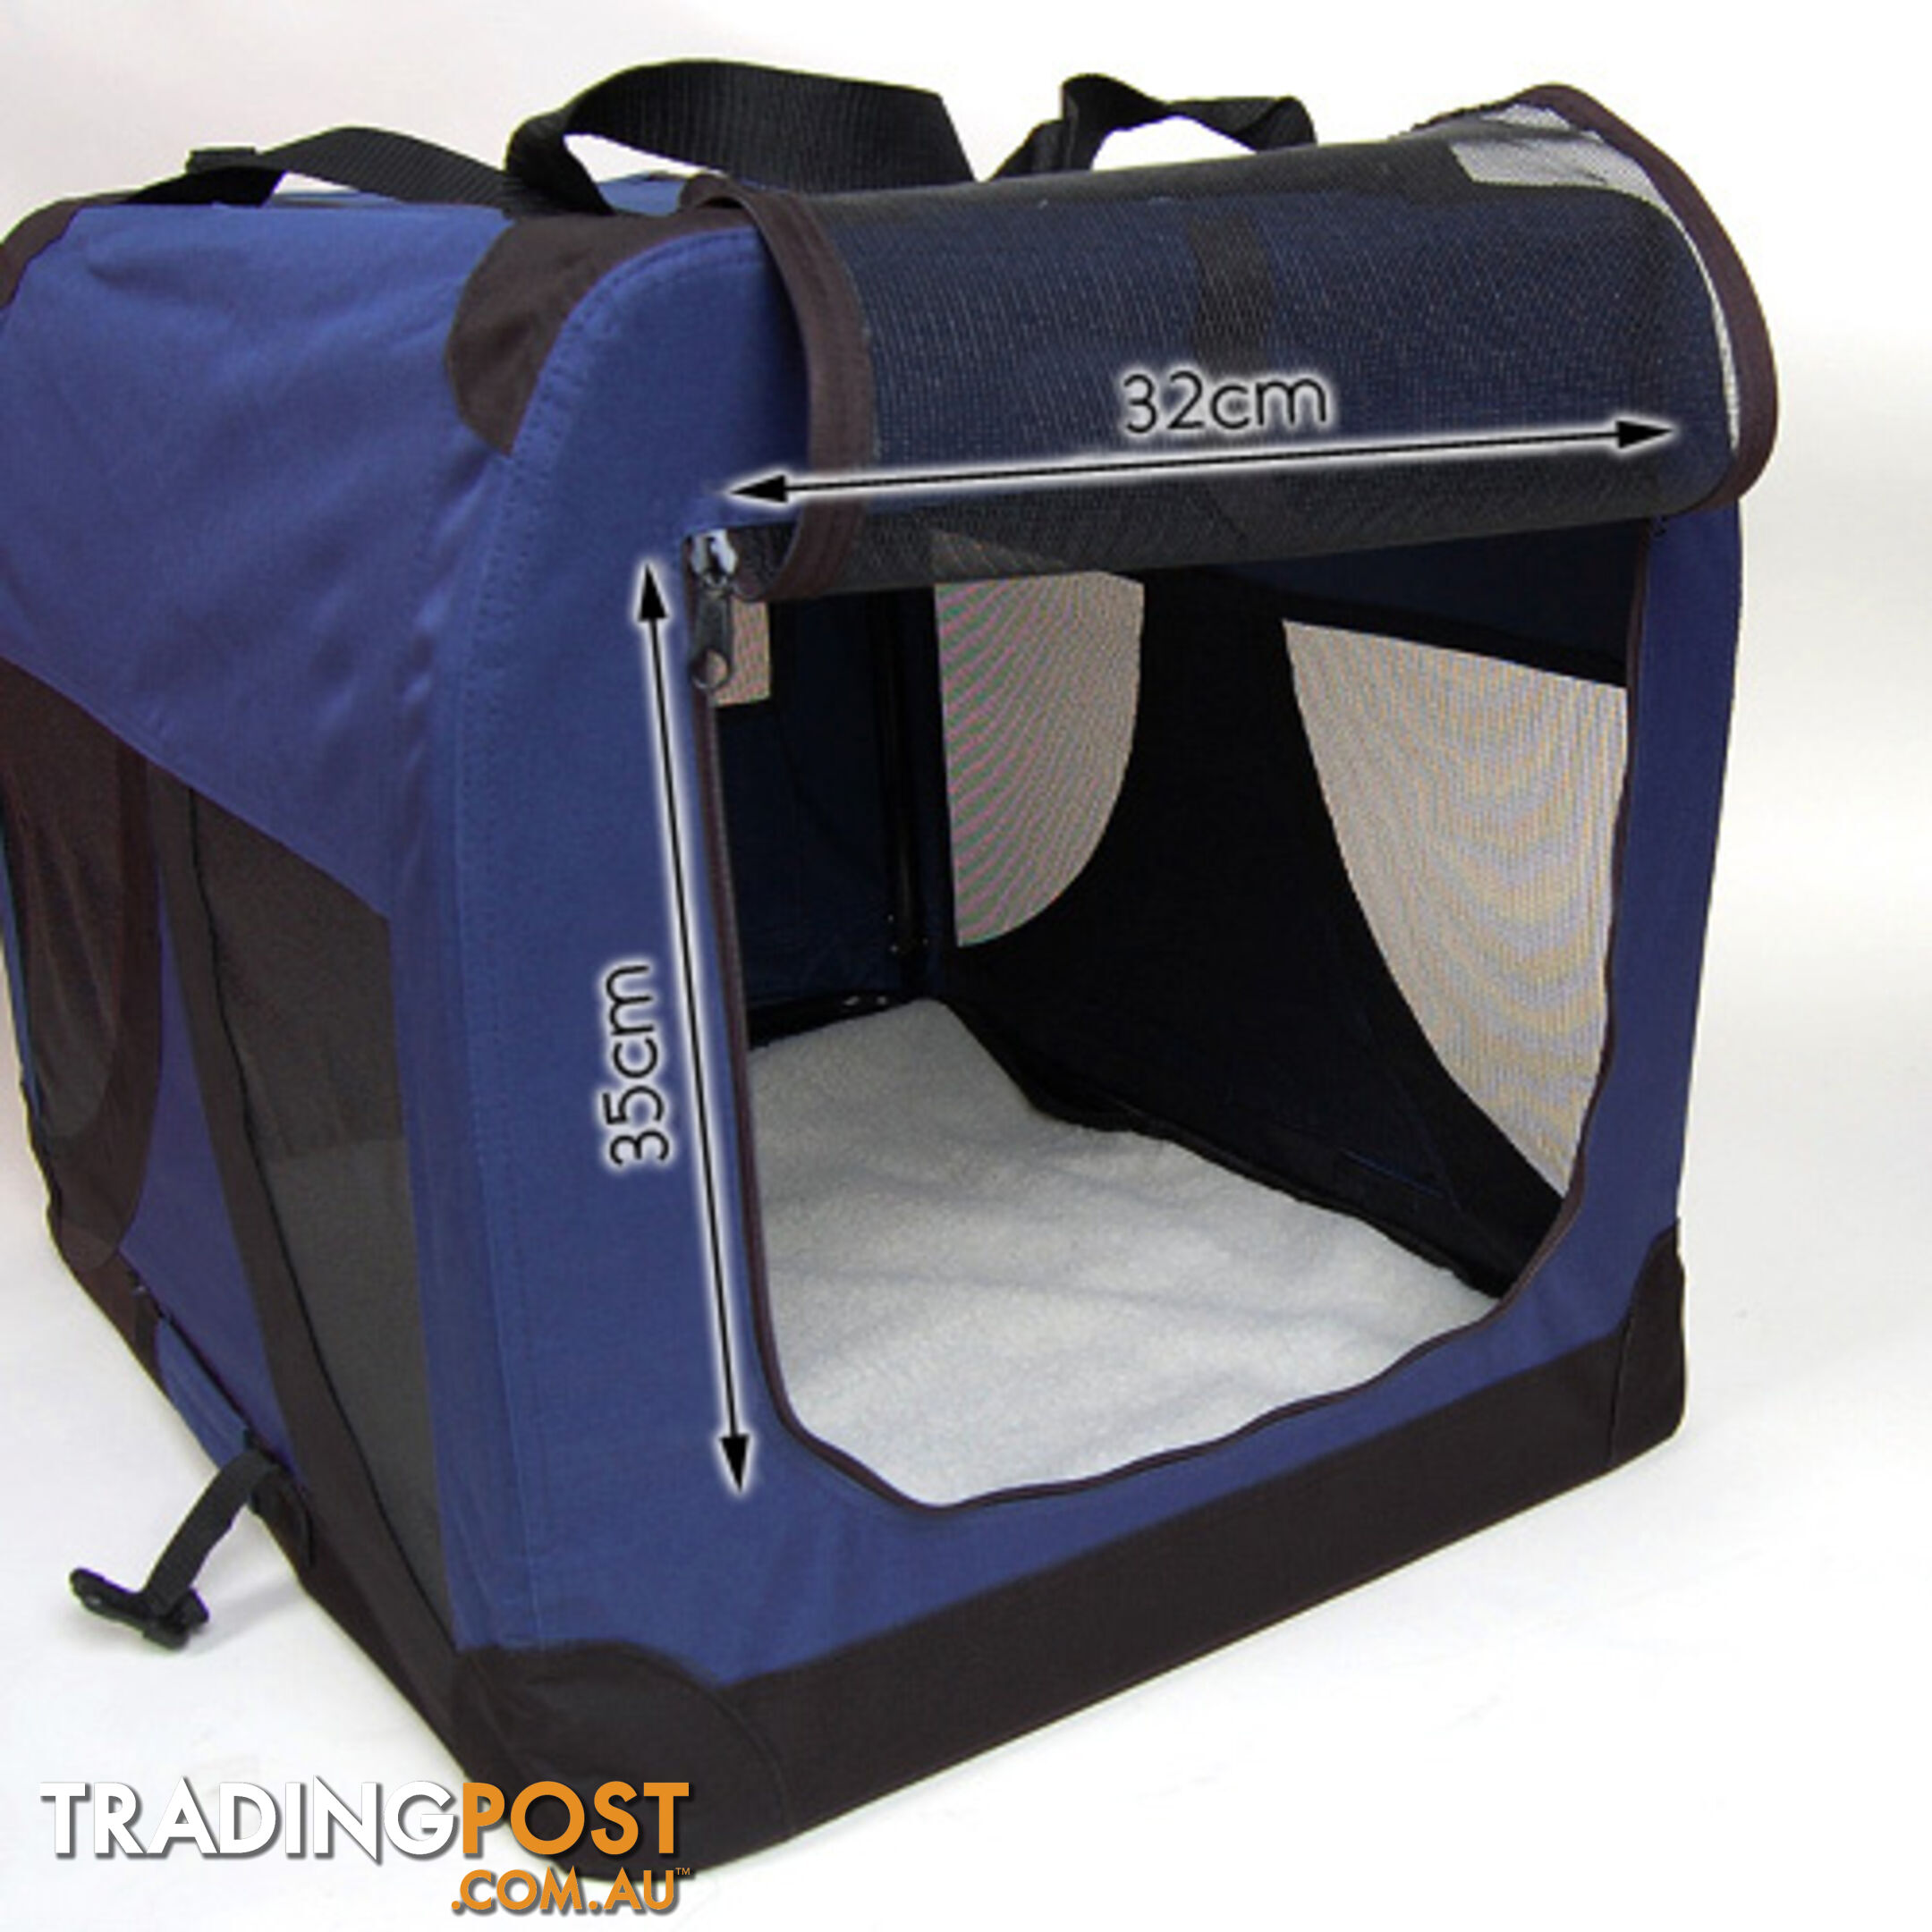 Large Portable Pet Soft Cage Puppy Dog Cat Crate Carrier Folding Kennel Blue